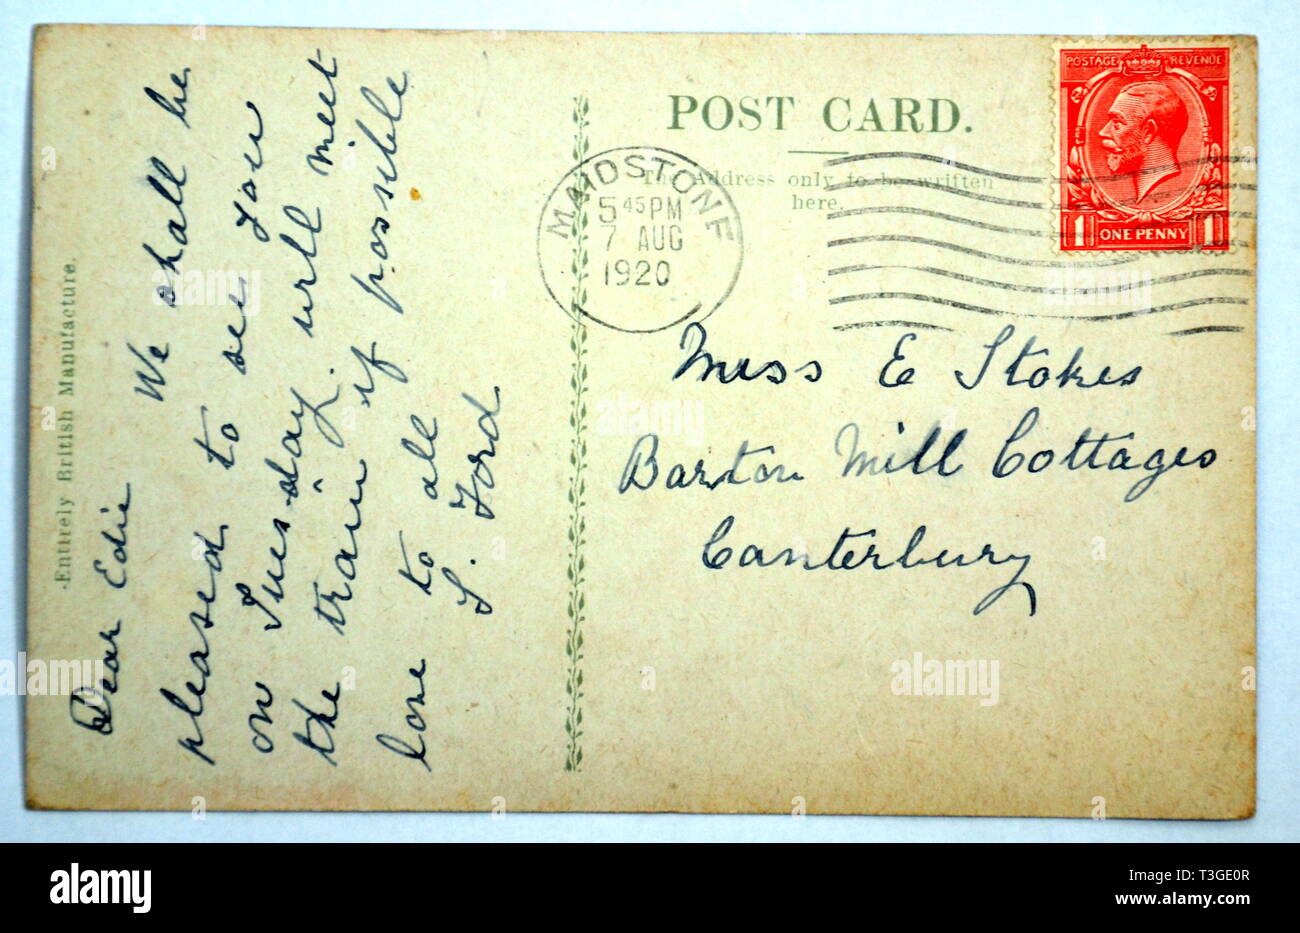 Reverse of Vintage Early 20th Century Postcard with English Writing and uk Address on Stock Photo